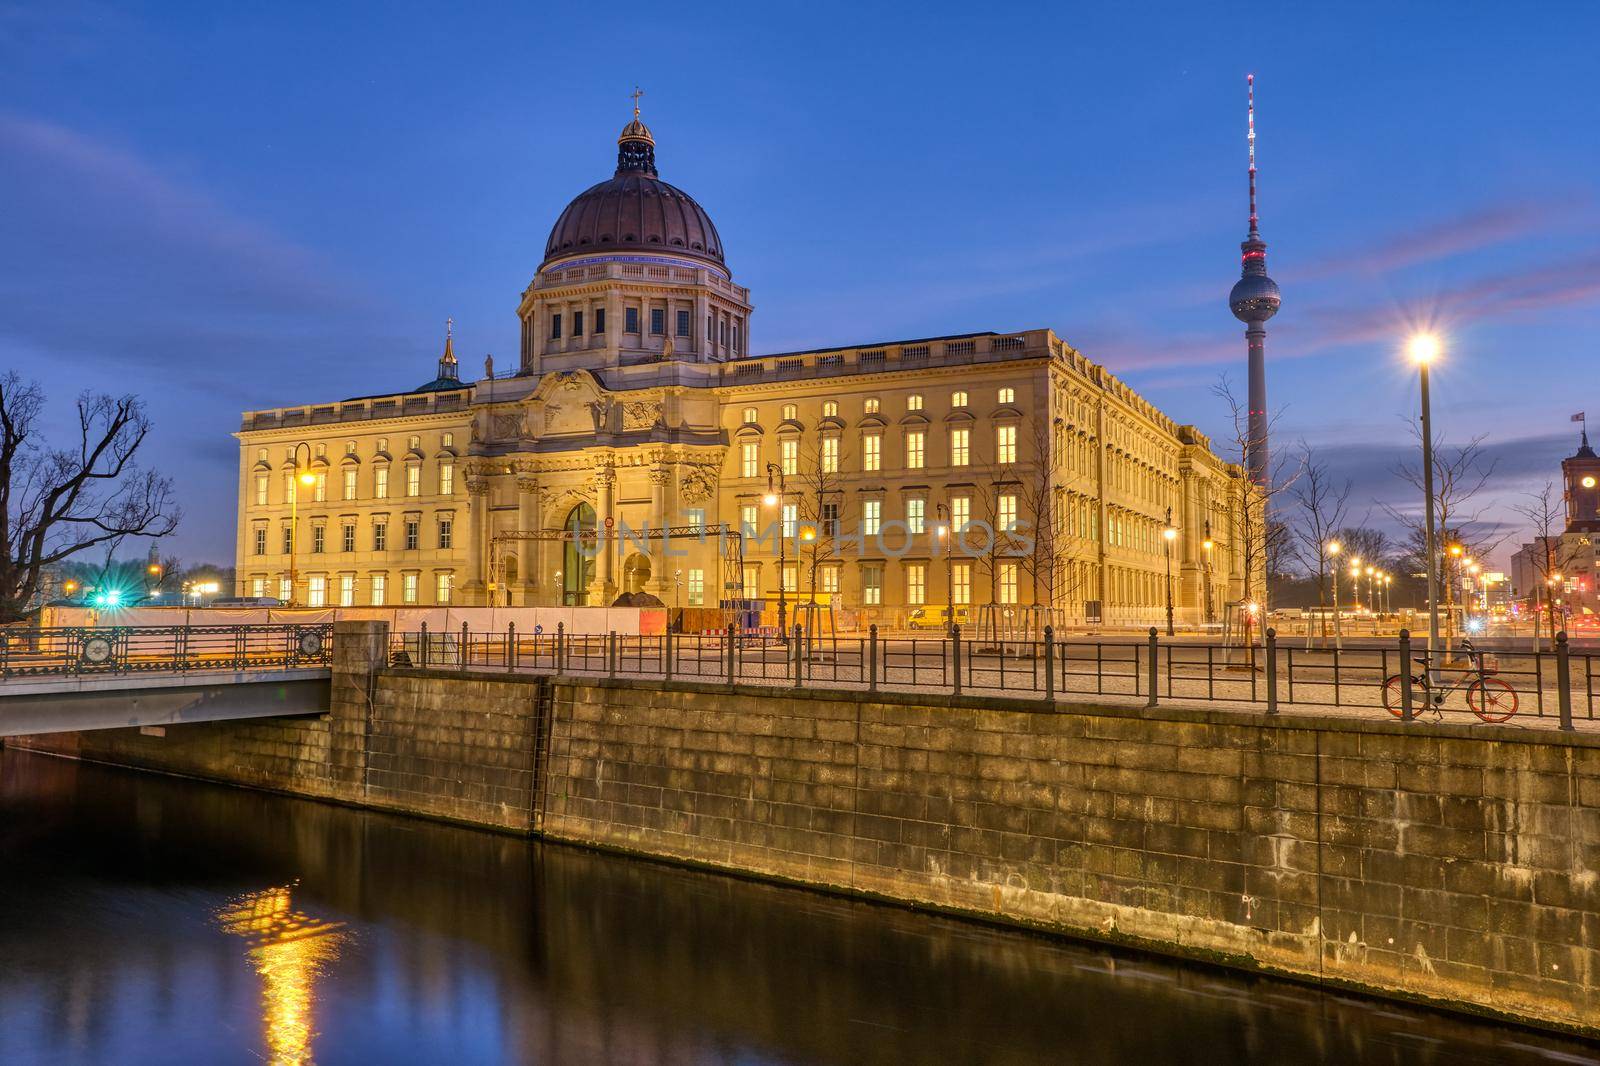 The imposing rebuilt Berlin City Palace at dawn by elxeneize